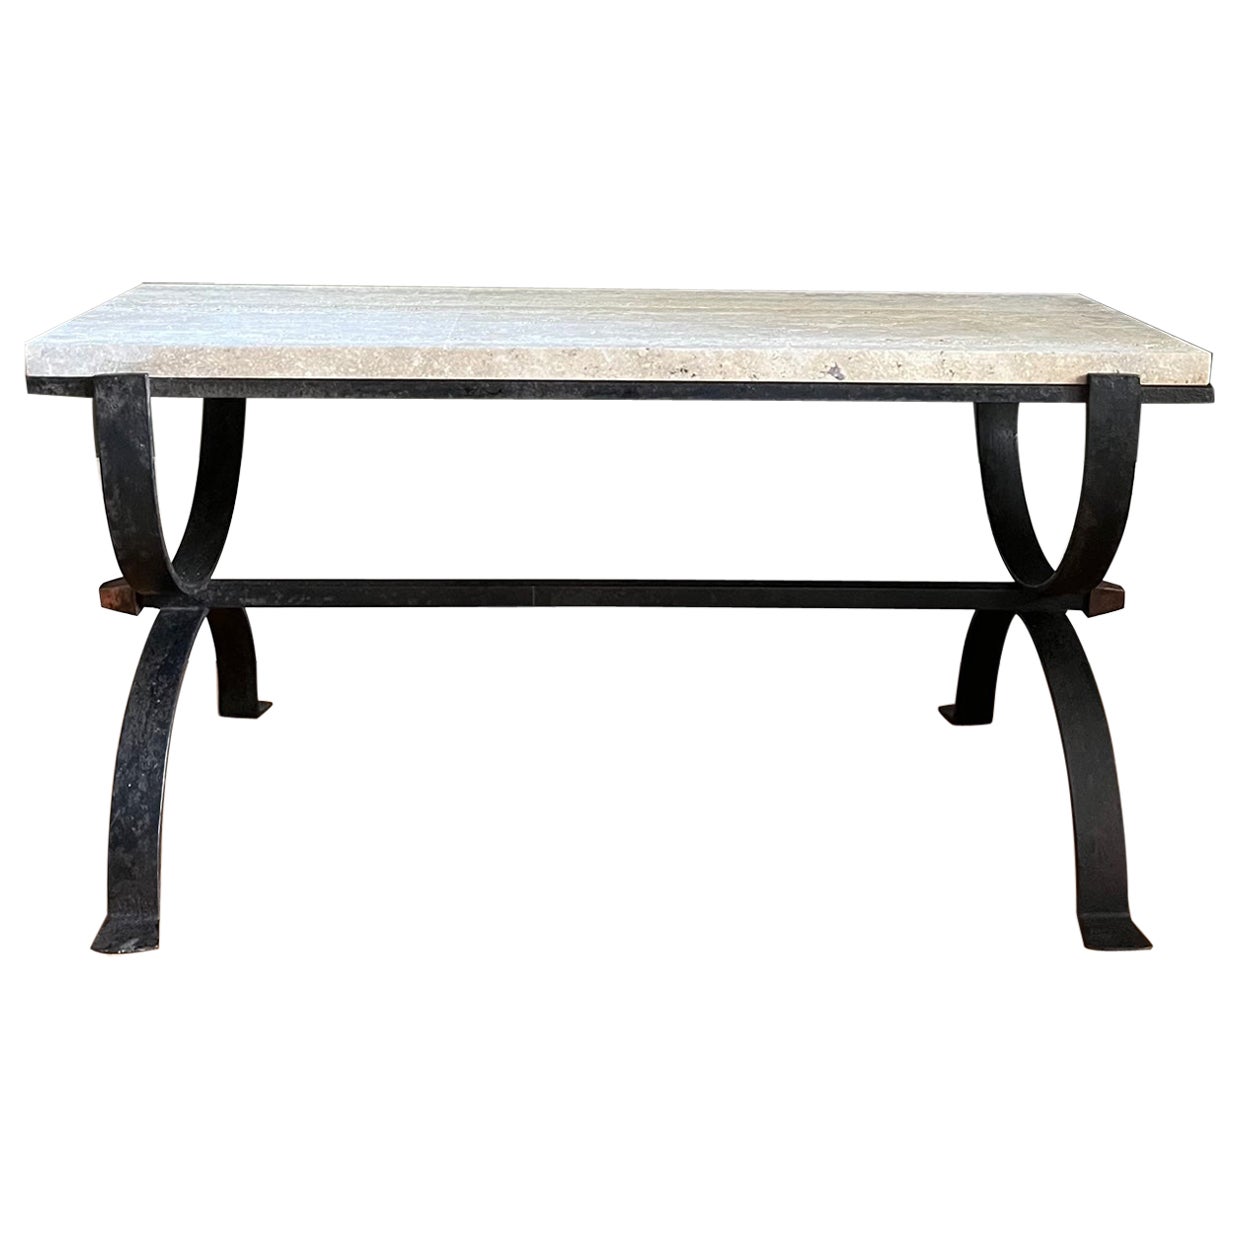 Small Wrought Iron and Travertine Coffee Table, French, c.1950s